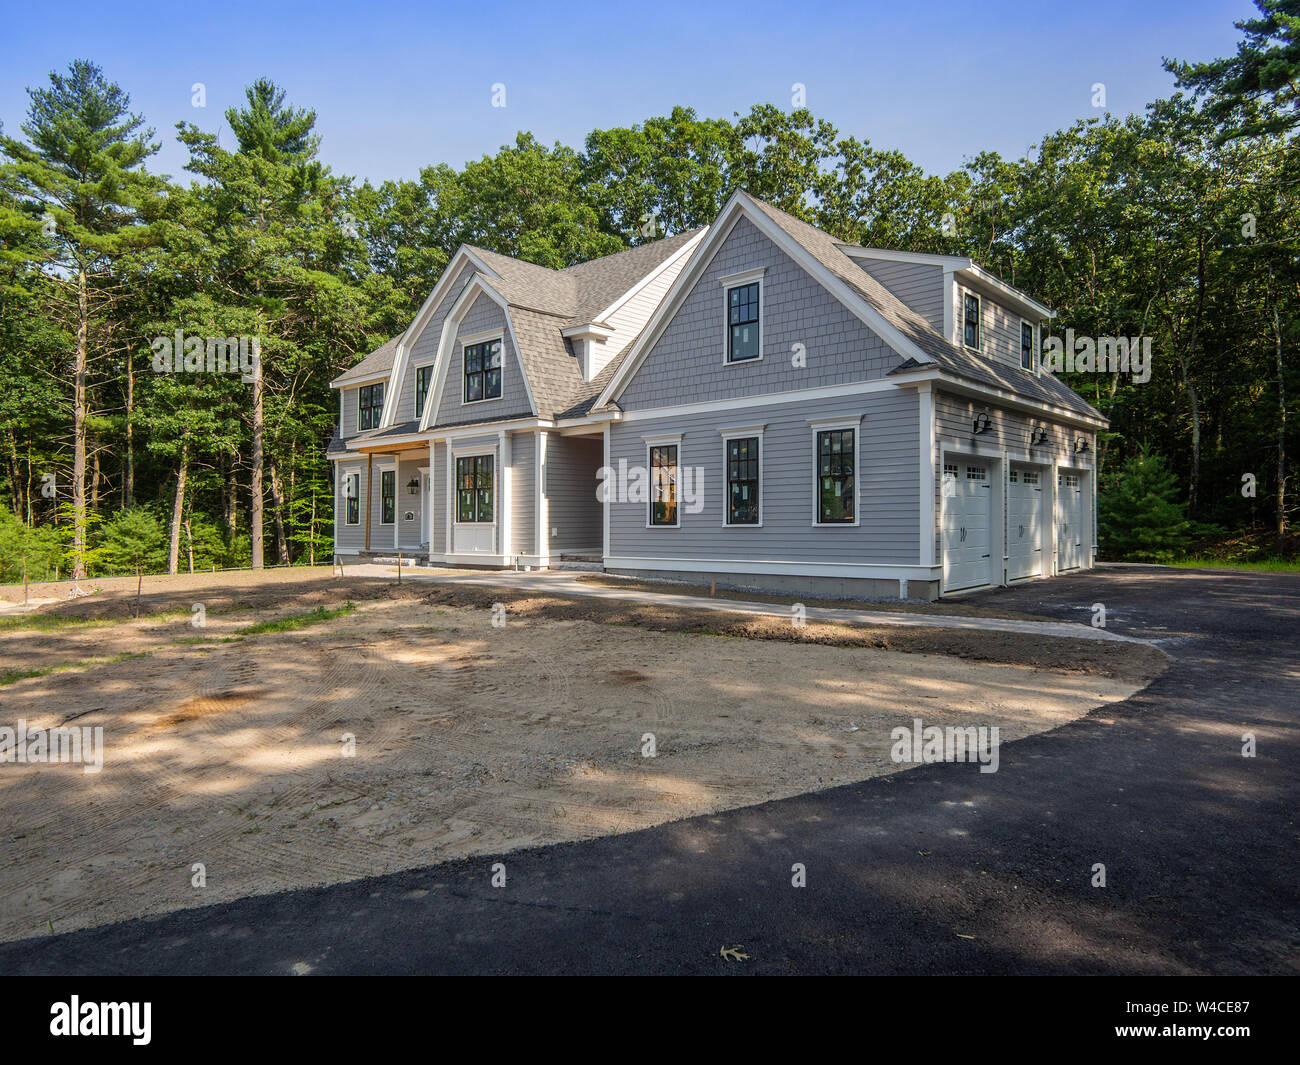 New house construction in the suburbs Stock Photo